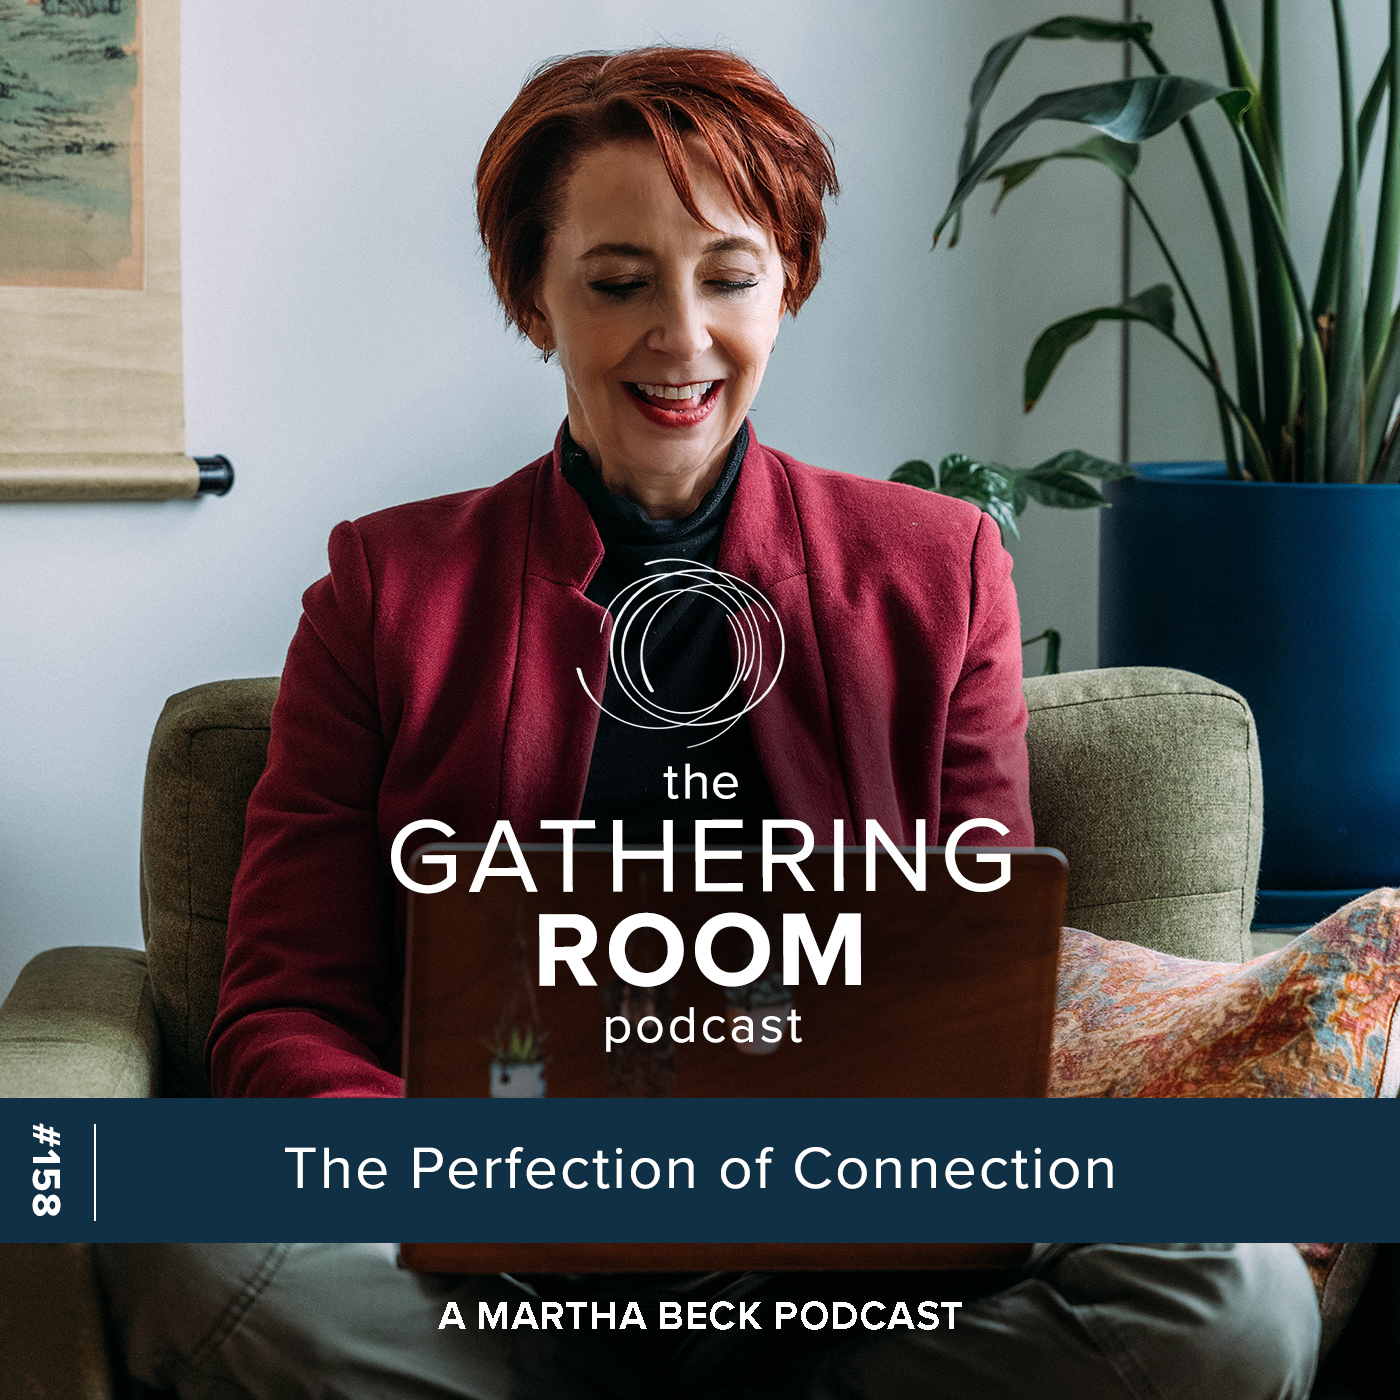 Image for The Gathering Pod A Martha Beck Podcast Episode #158 The Perfection of Connection